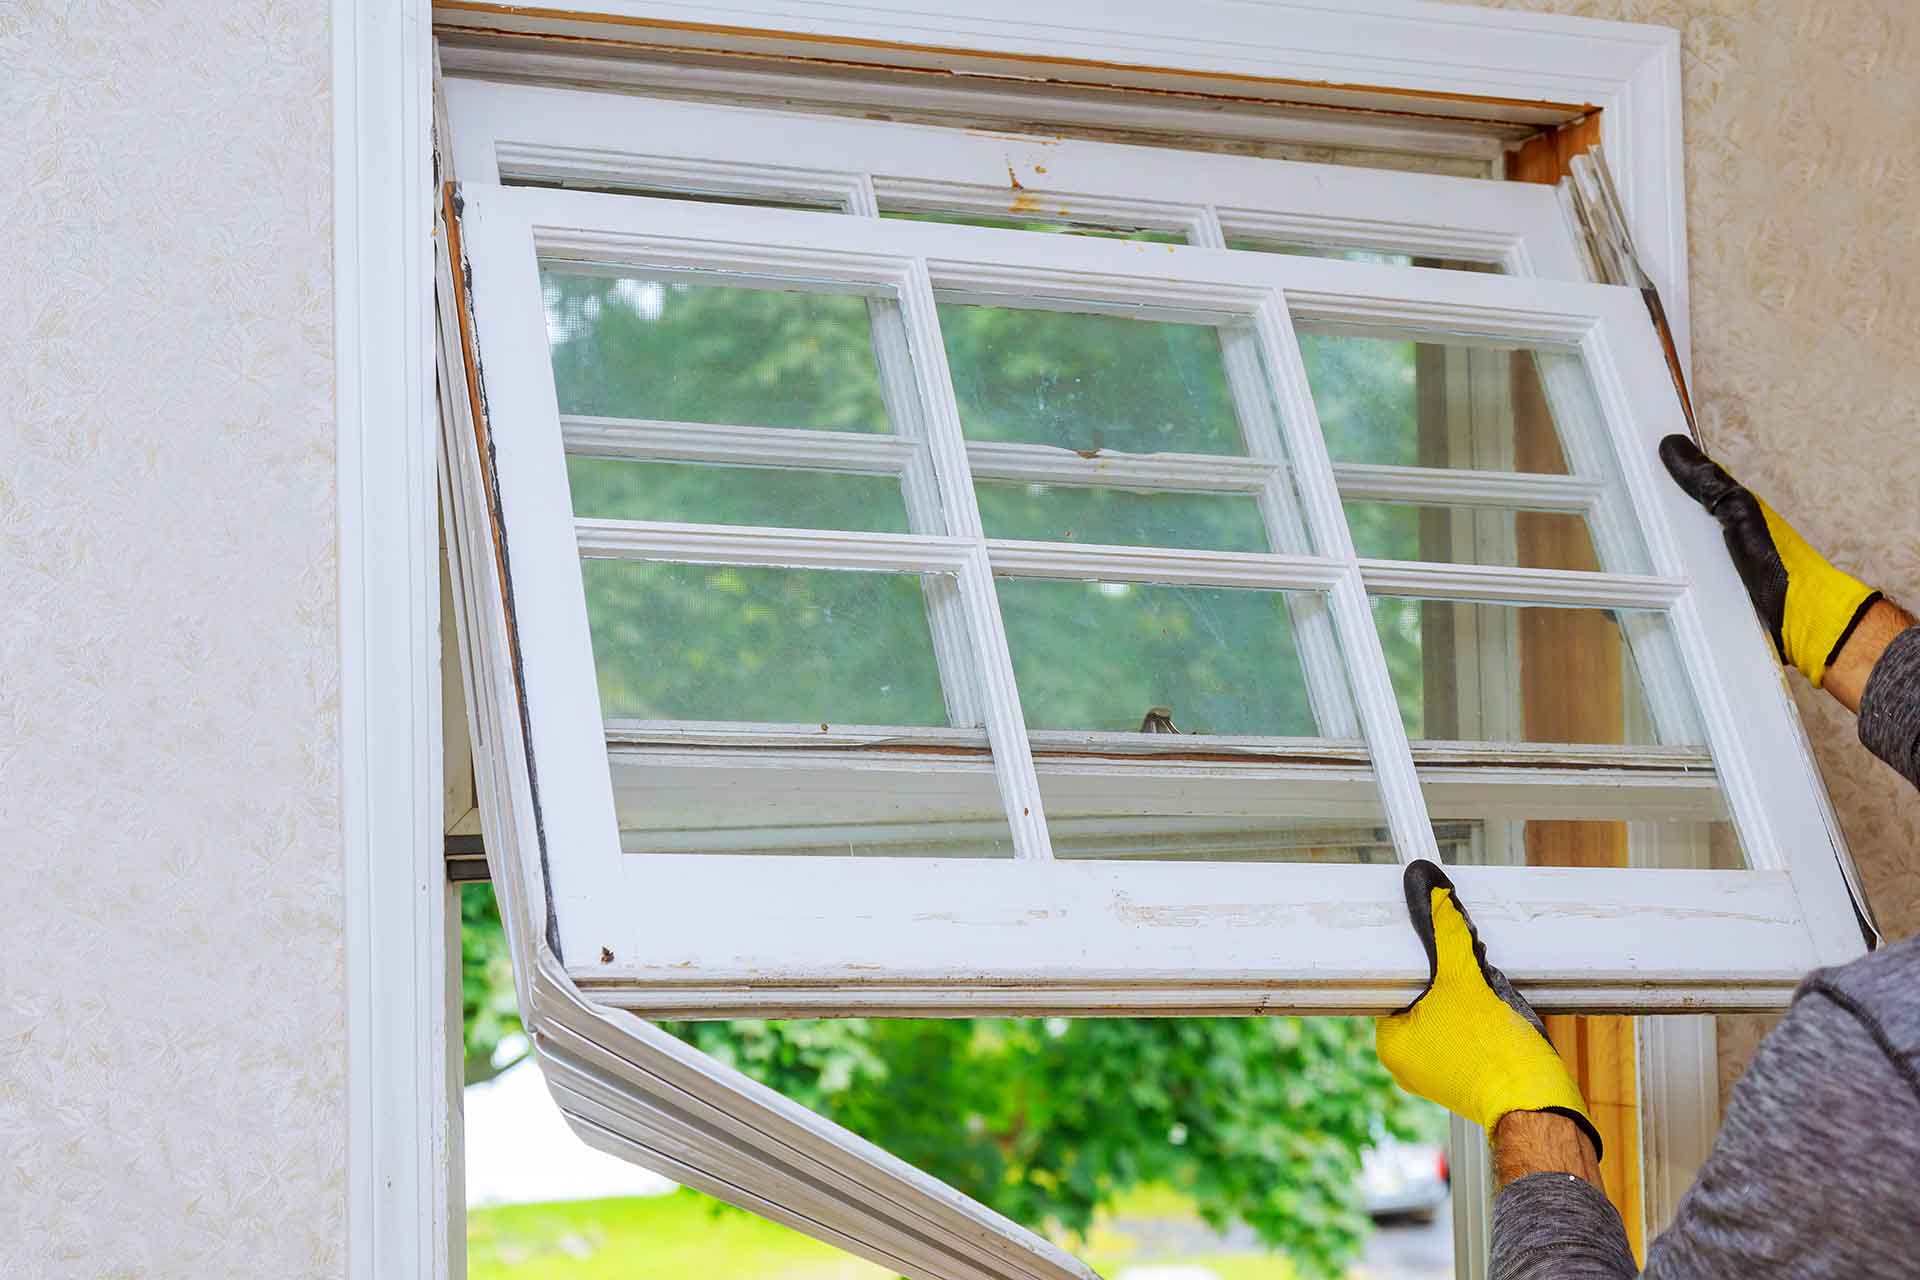 5 Reasons Why You Should Not Replace Your Own Windows (and Why Seek Expert Help)